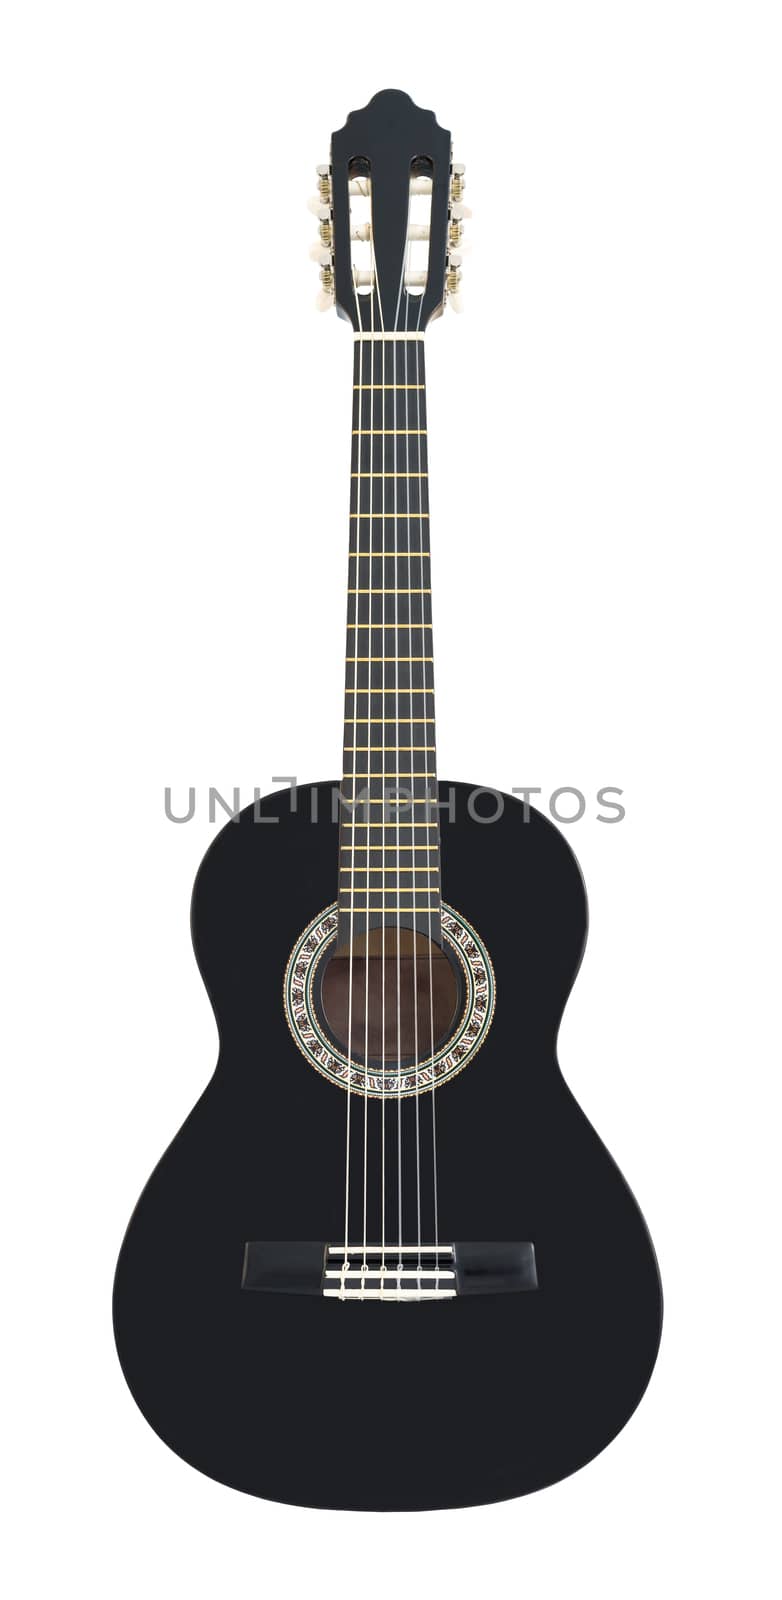 Black Wooden Classical Acoustic Guitar Isolated on a White Background